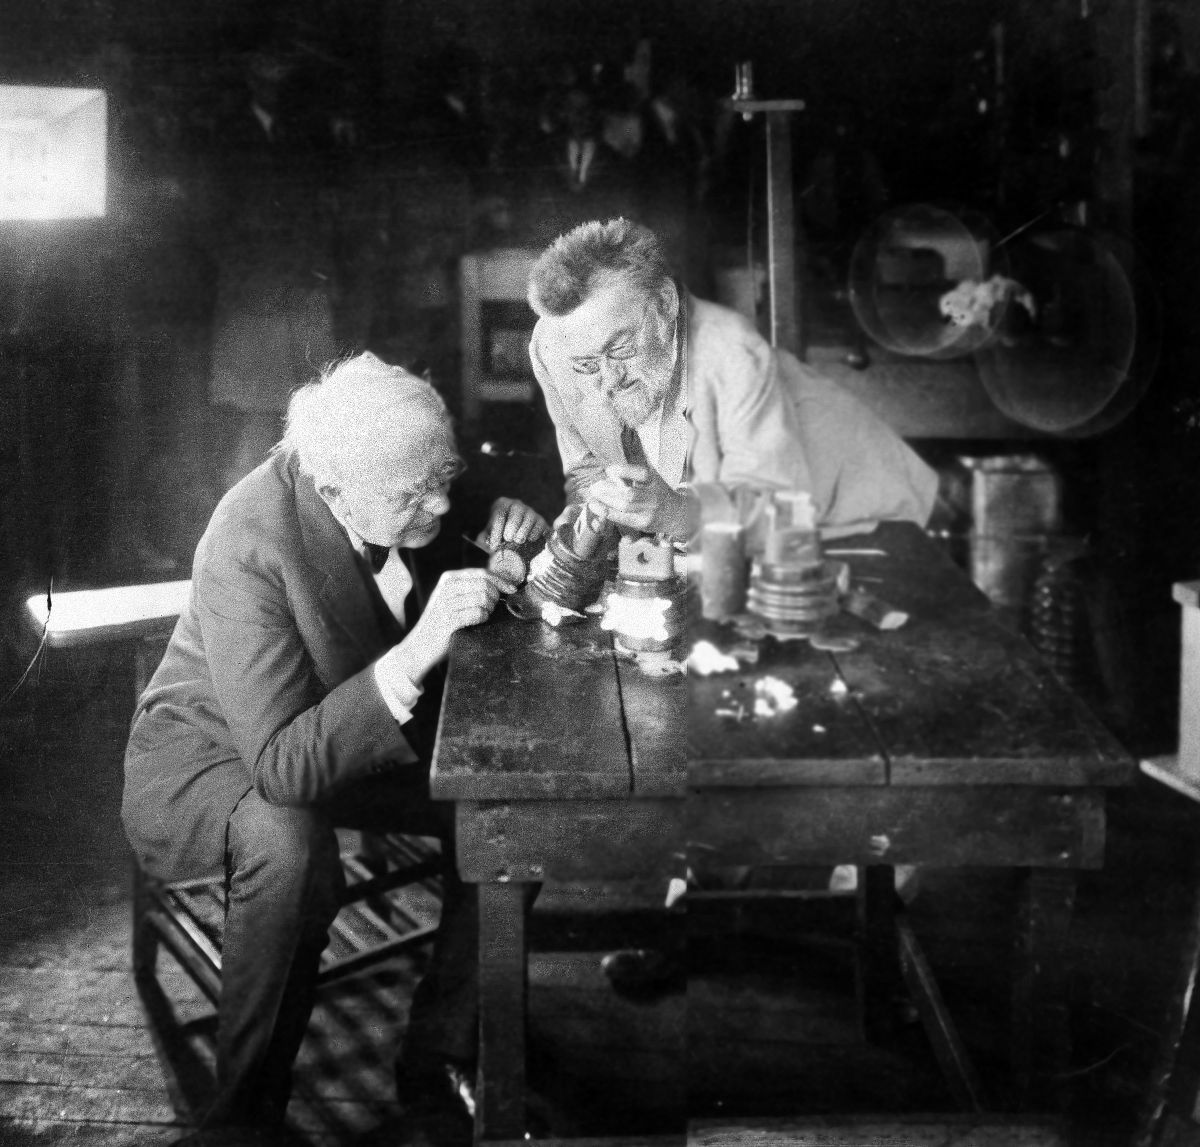 Inventors Thomas Edison, left, and Charles Steinmetz work in Steinmetz’s laboratory during the Great Depression. “Innovation is the way America generally gets out of downturns,” says Robert Budens, president of the Patent Office Professional Association. (The Spokesman-Review)